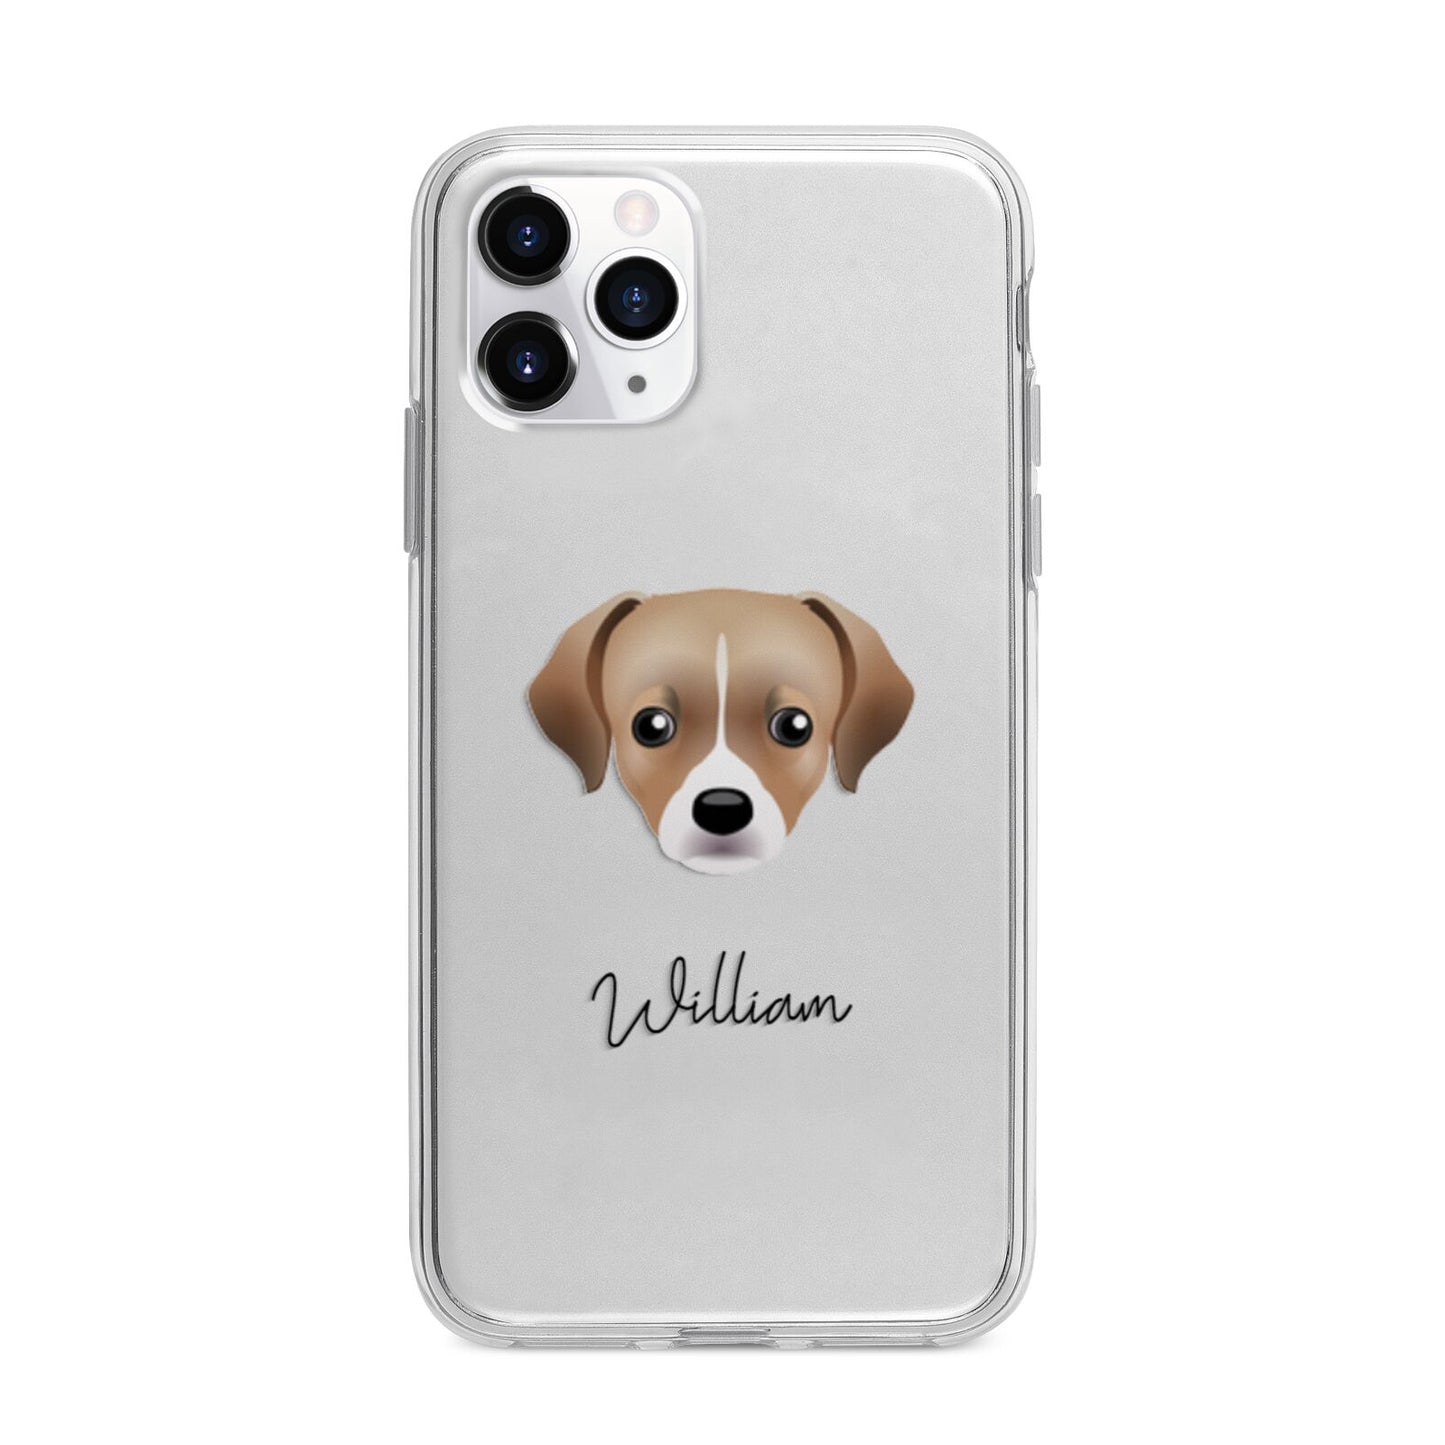 Cheagle Personalised Apple iPhone 11 Pro Max in Silver with Bumper Case